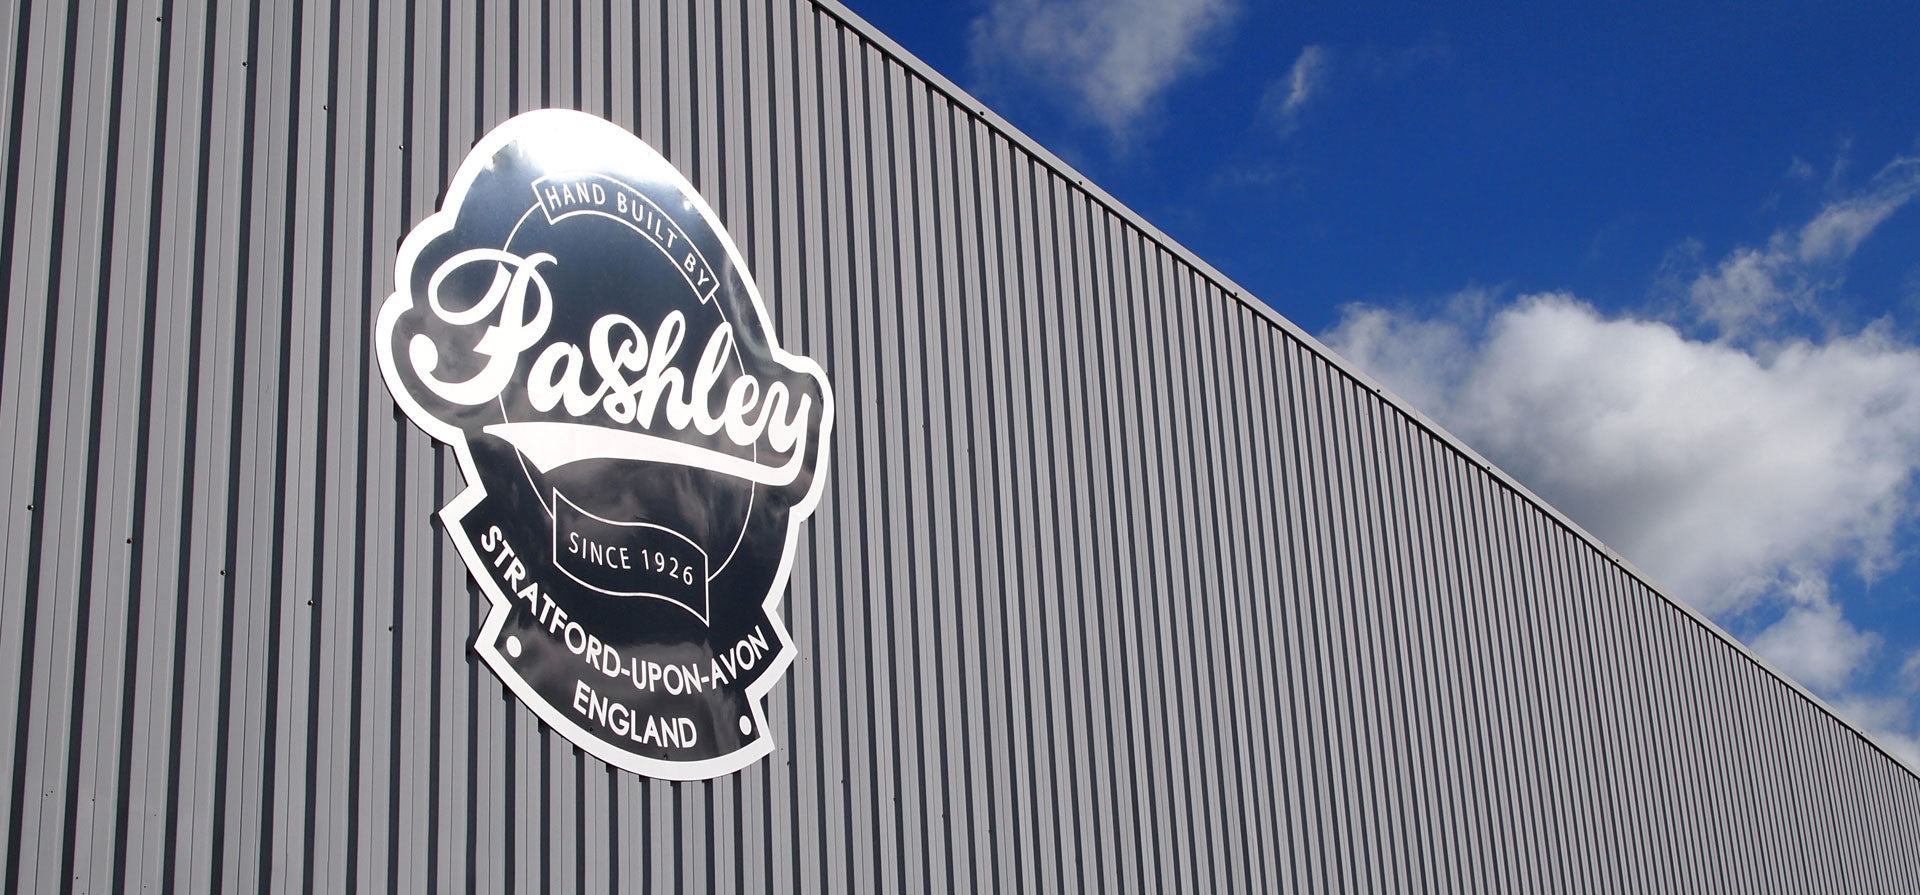 A large Pashley headbadge sign on the front of the Pashley bike factory with blue sky and clouds in the background.